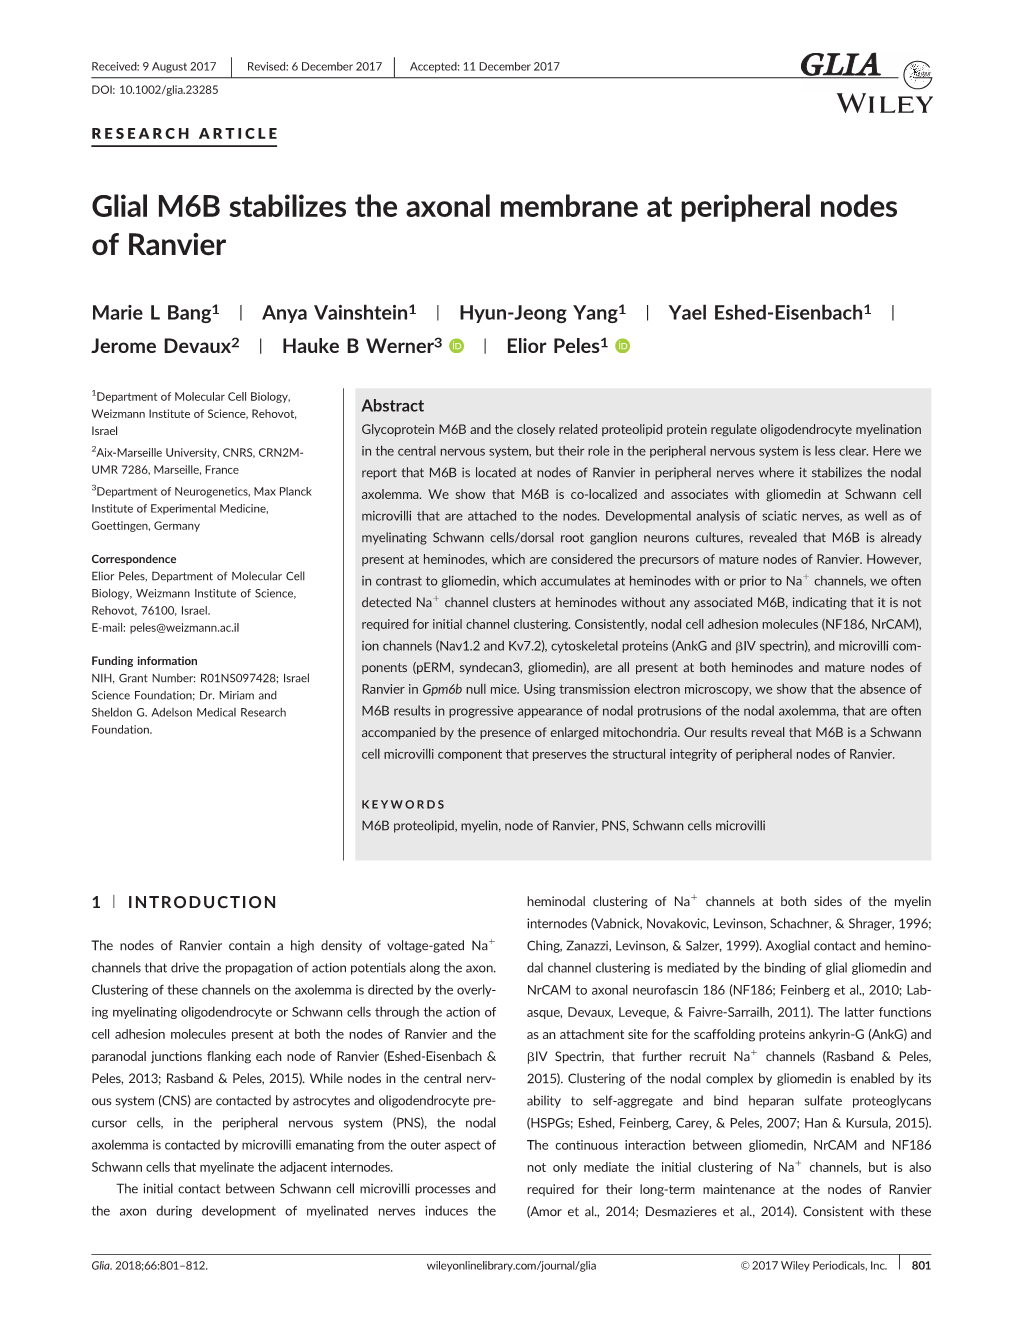 Glial M6B Stabilizes the Axonal Membrane at Peripheral Nodes of Ranvier